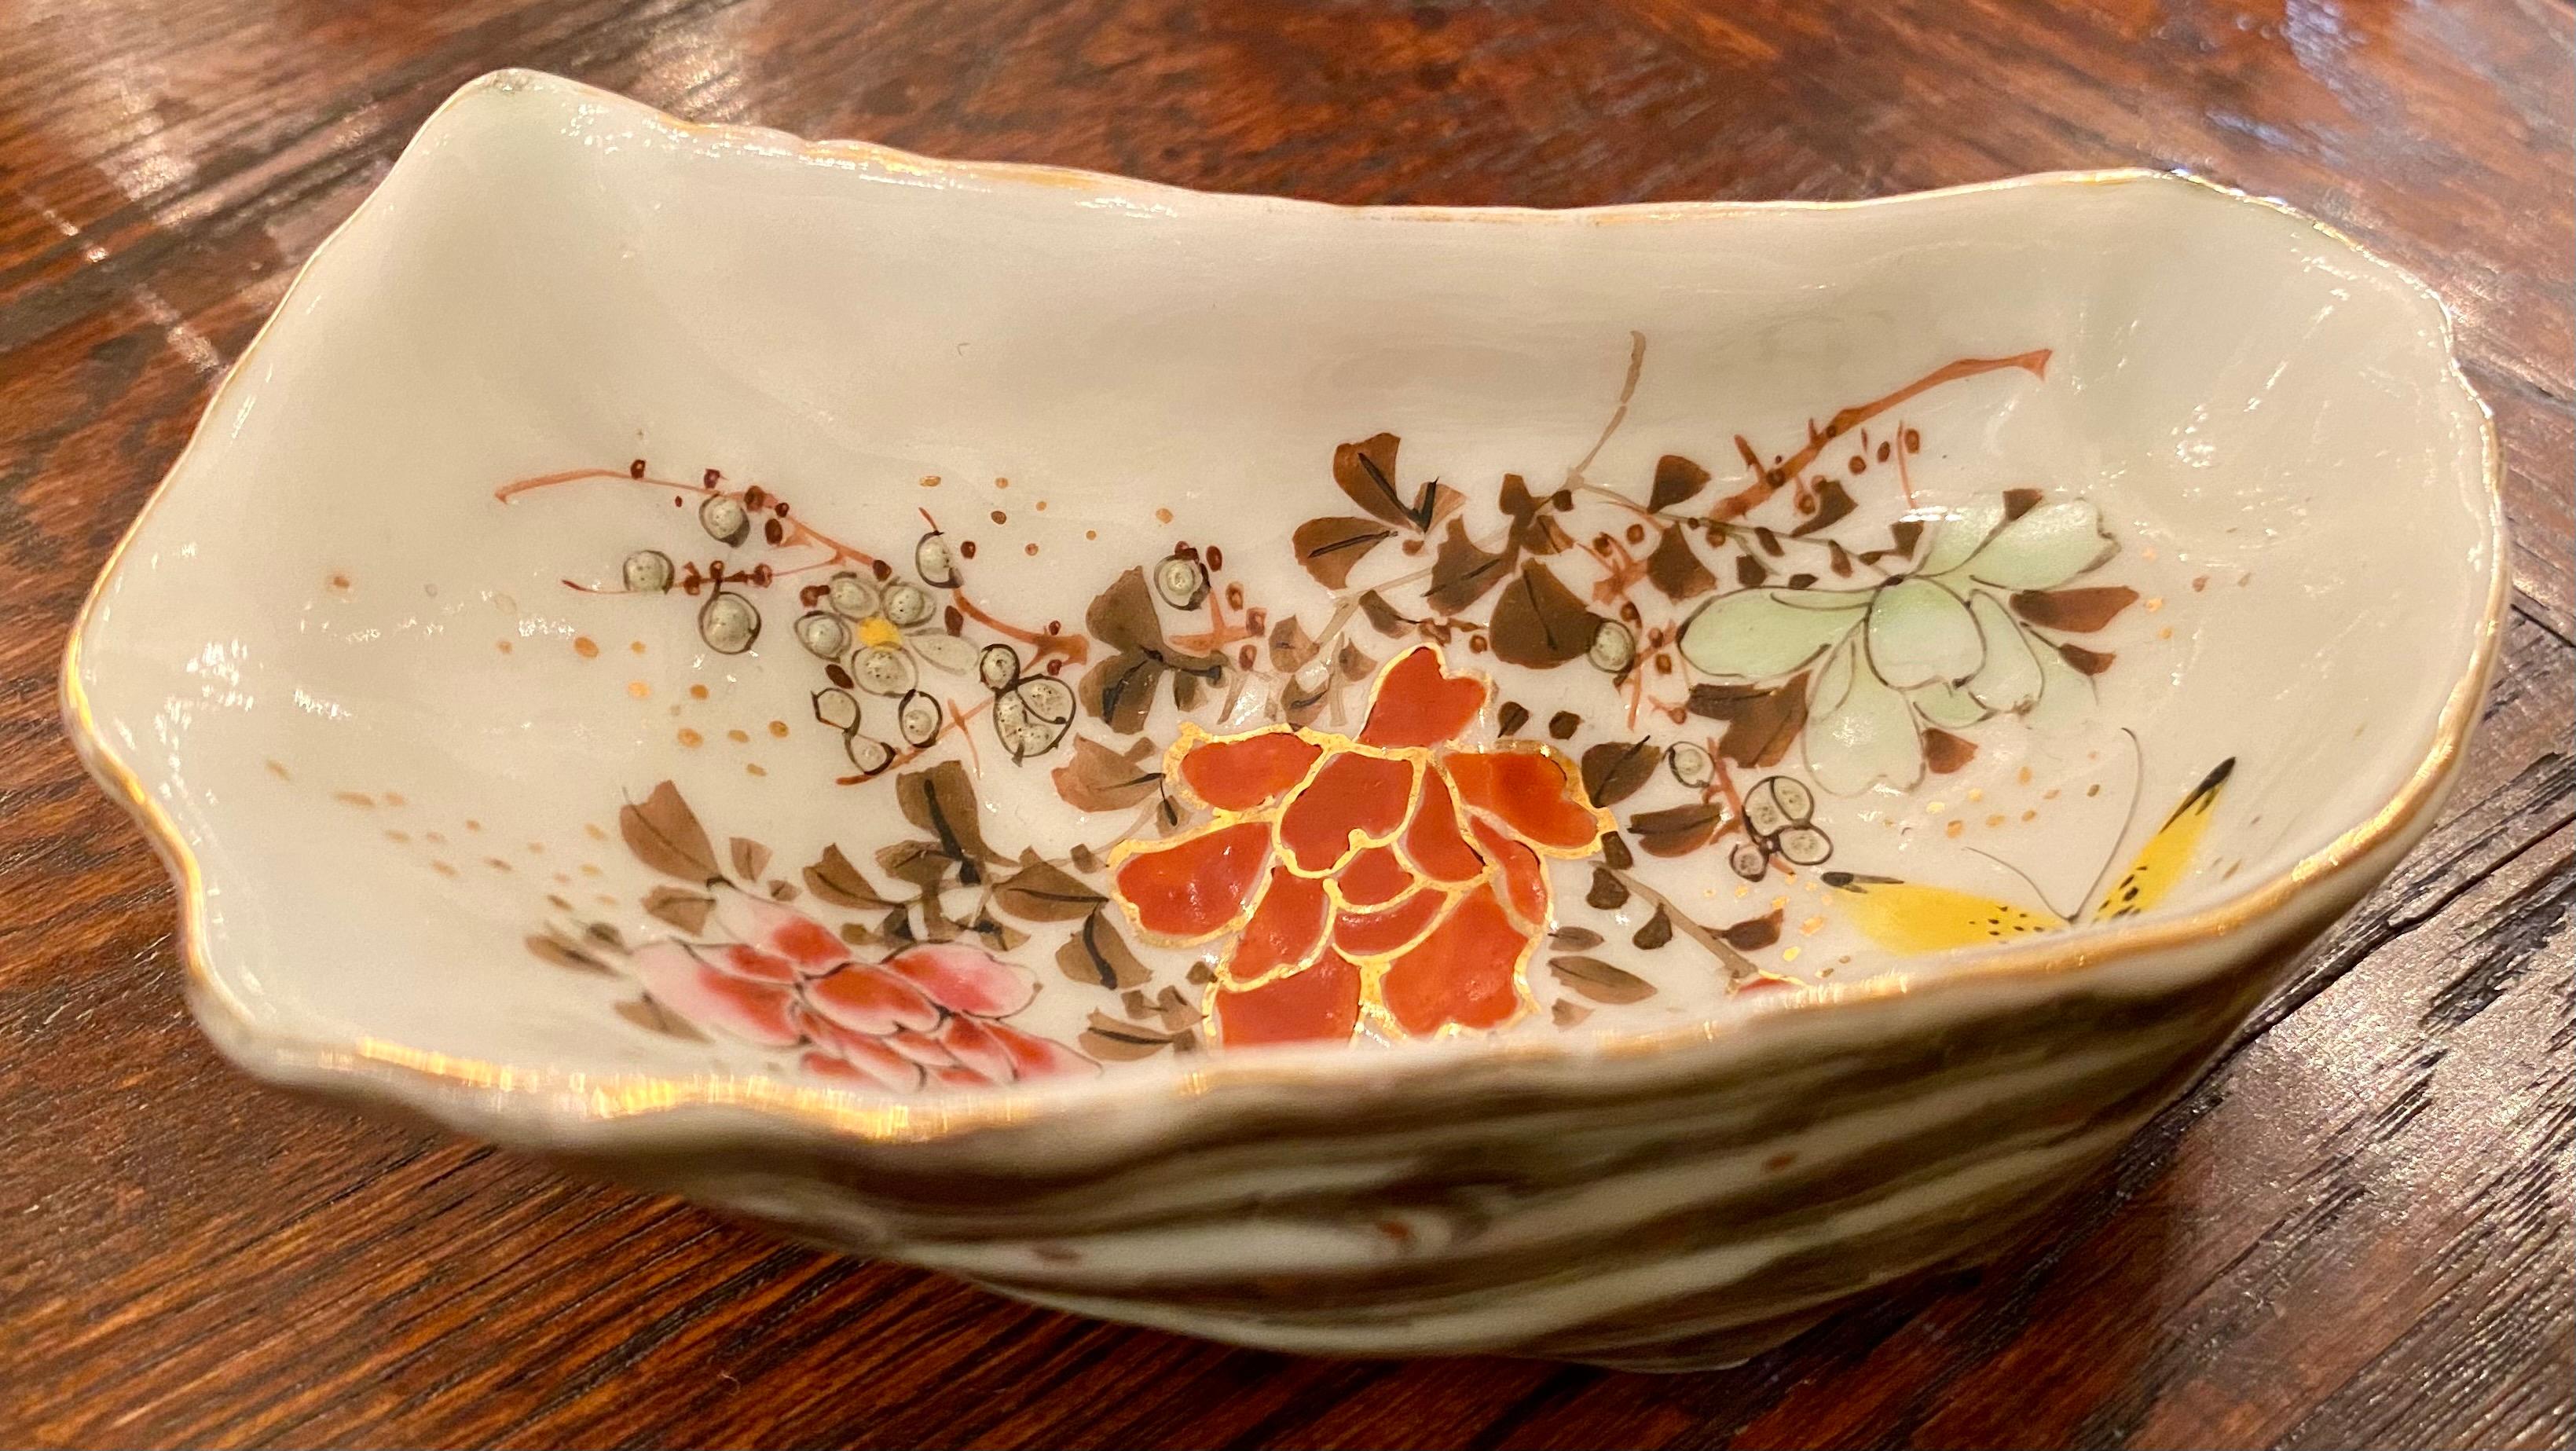 Antique Japanese hand painted Kutani porcelain oyster shooter with yellow butterfly and flowers, circa 1890.
All individually hand-painted in various colors and motifs.
   